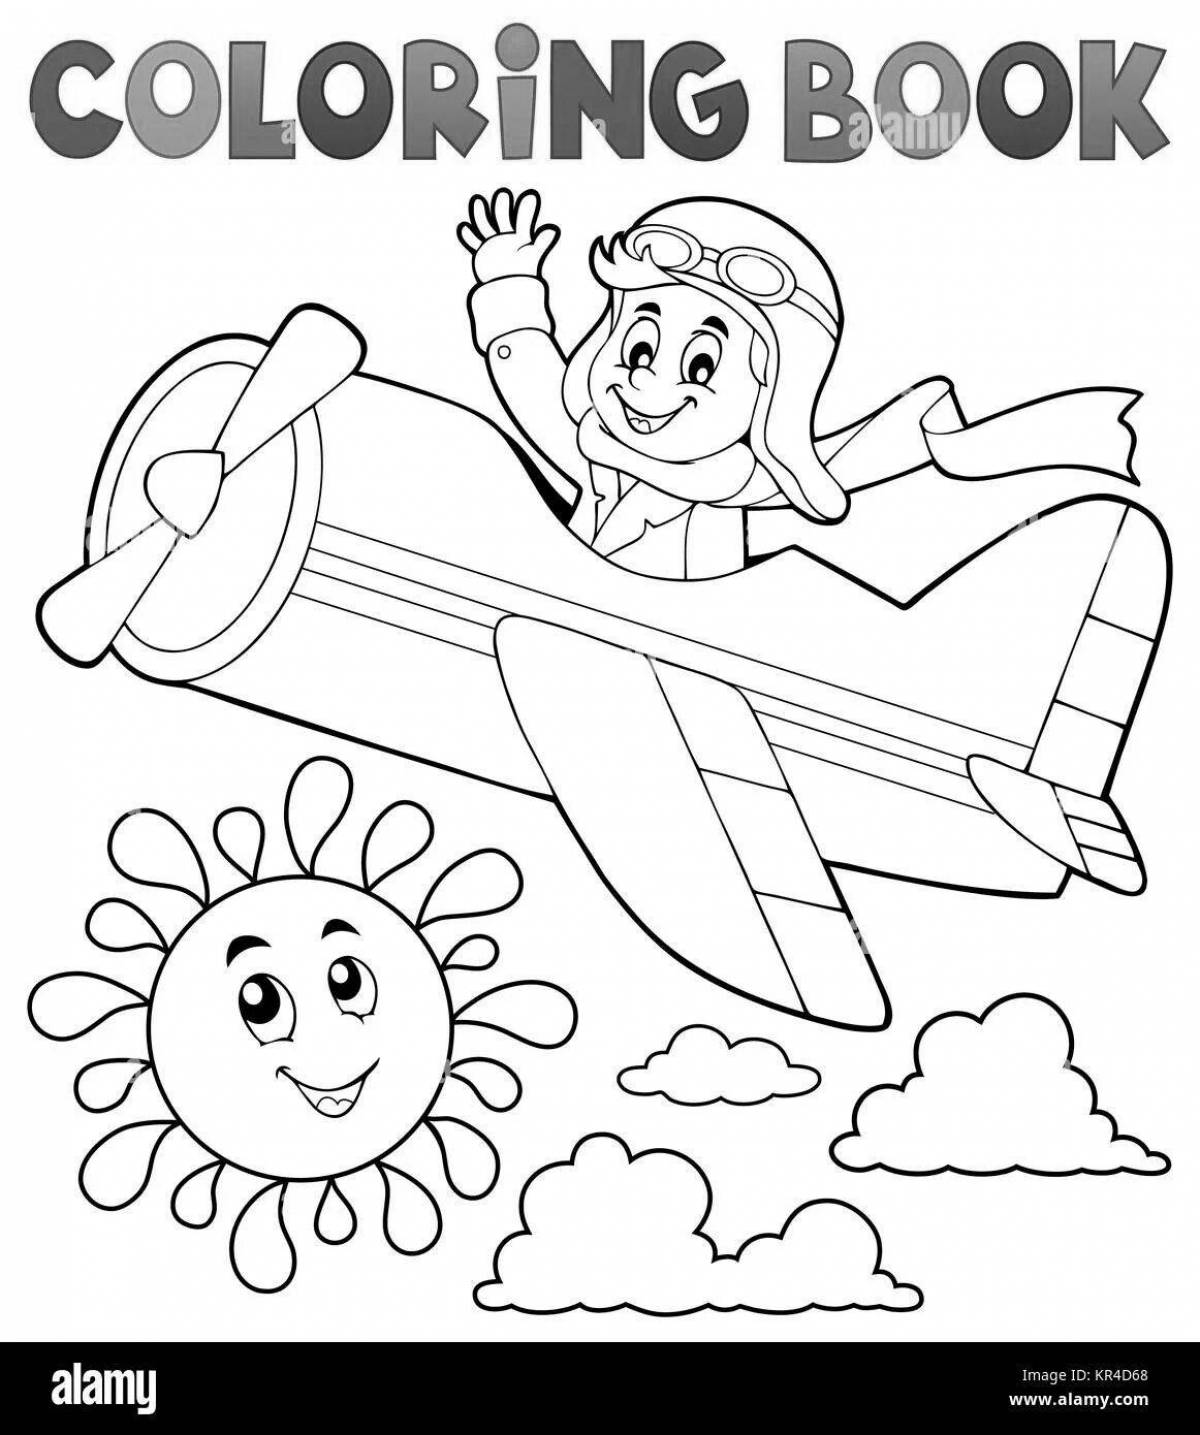 Creative pilot coloring for little ones